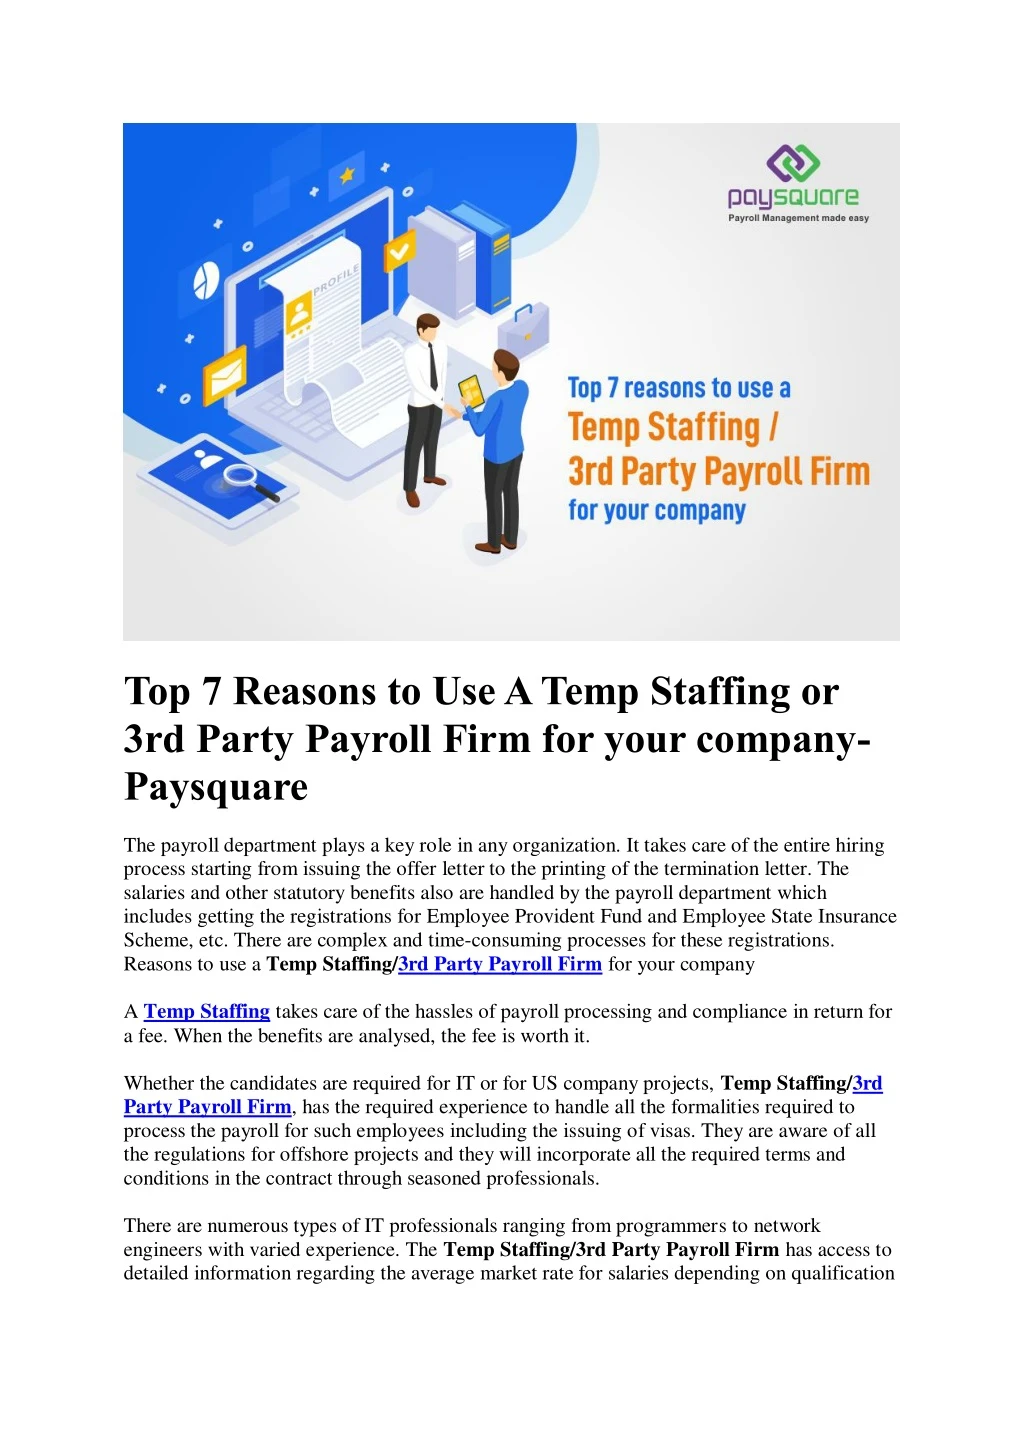 top 7 reasons to use a temp staffing or 3rd party